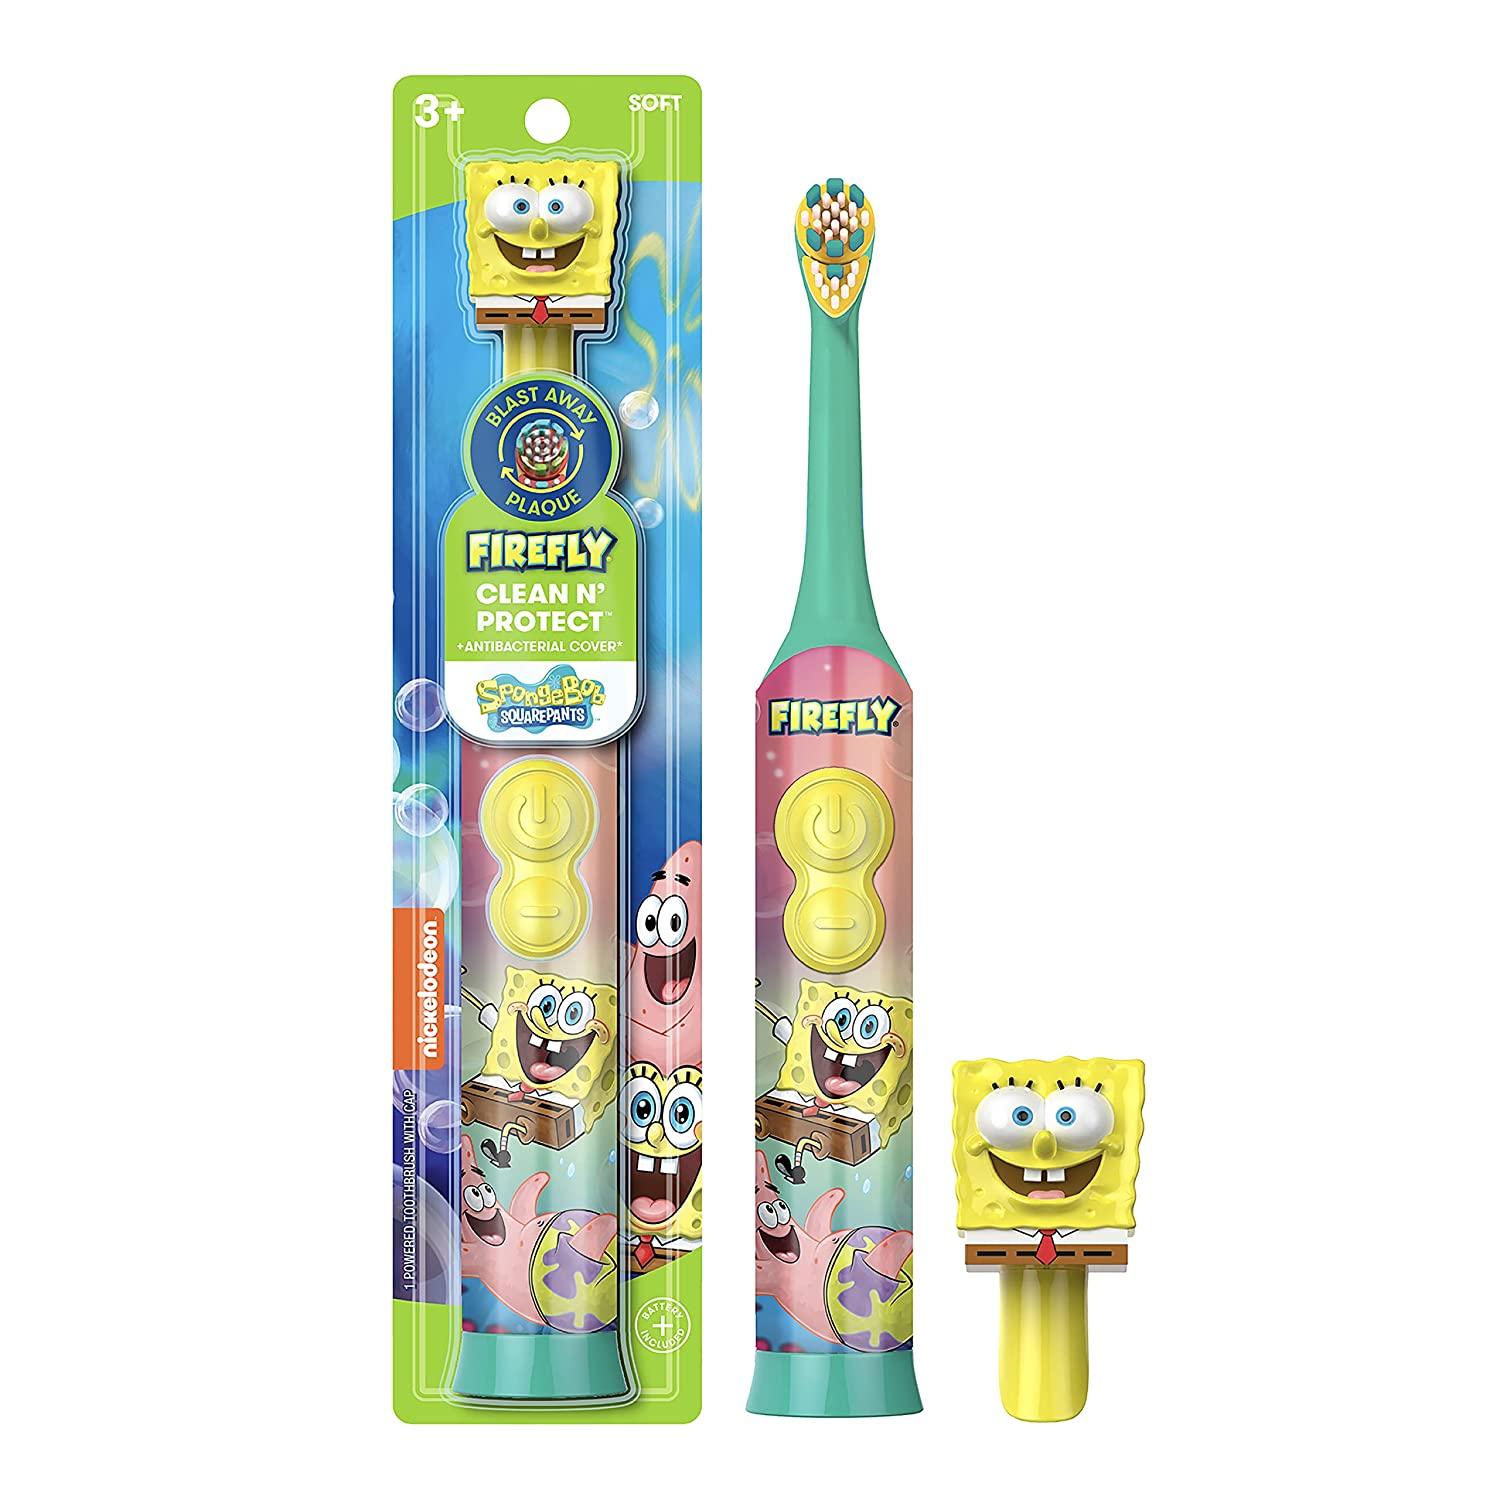 Firefly Clean N' Protect Spongebob Power Toothbrush - BumbleToys - 5-7 Years, Baby Saftey & Health, Boys, Girls, Pre-Order, Toothbrush